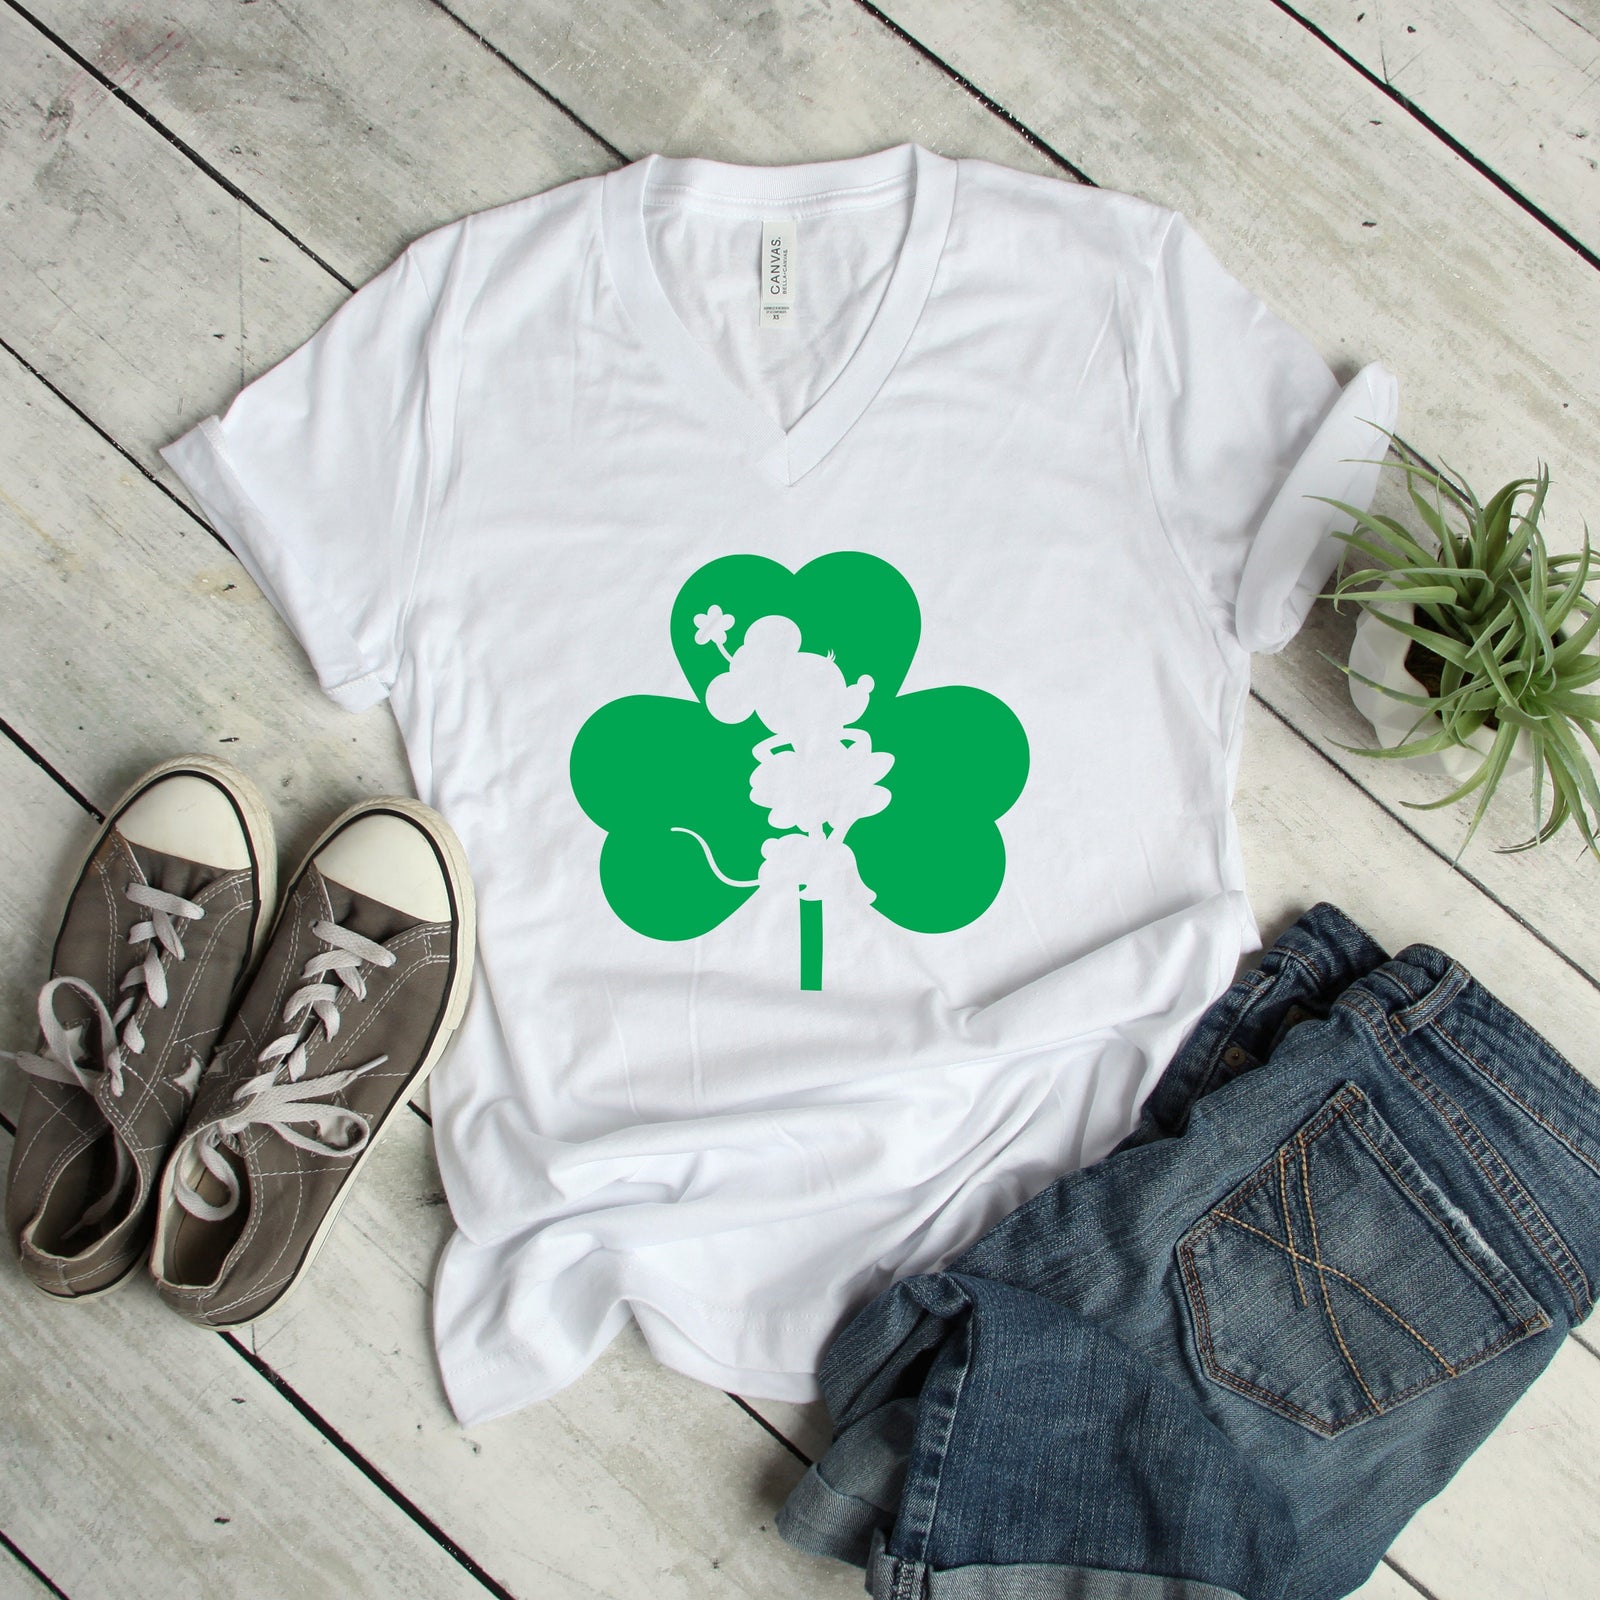 St. Patrick's Day Minnie Mouse T Shirt- Outline Silhouette inside Shamrock - Lucky Disney Minnie Shirt